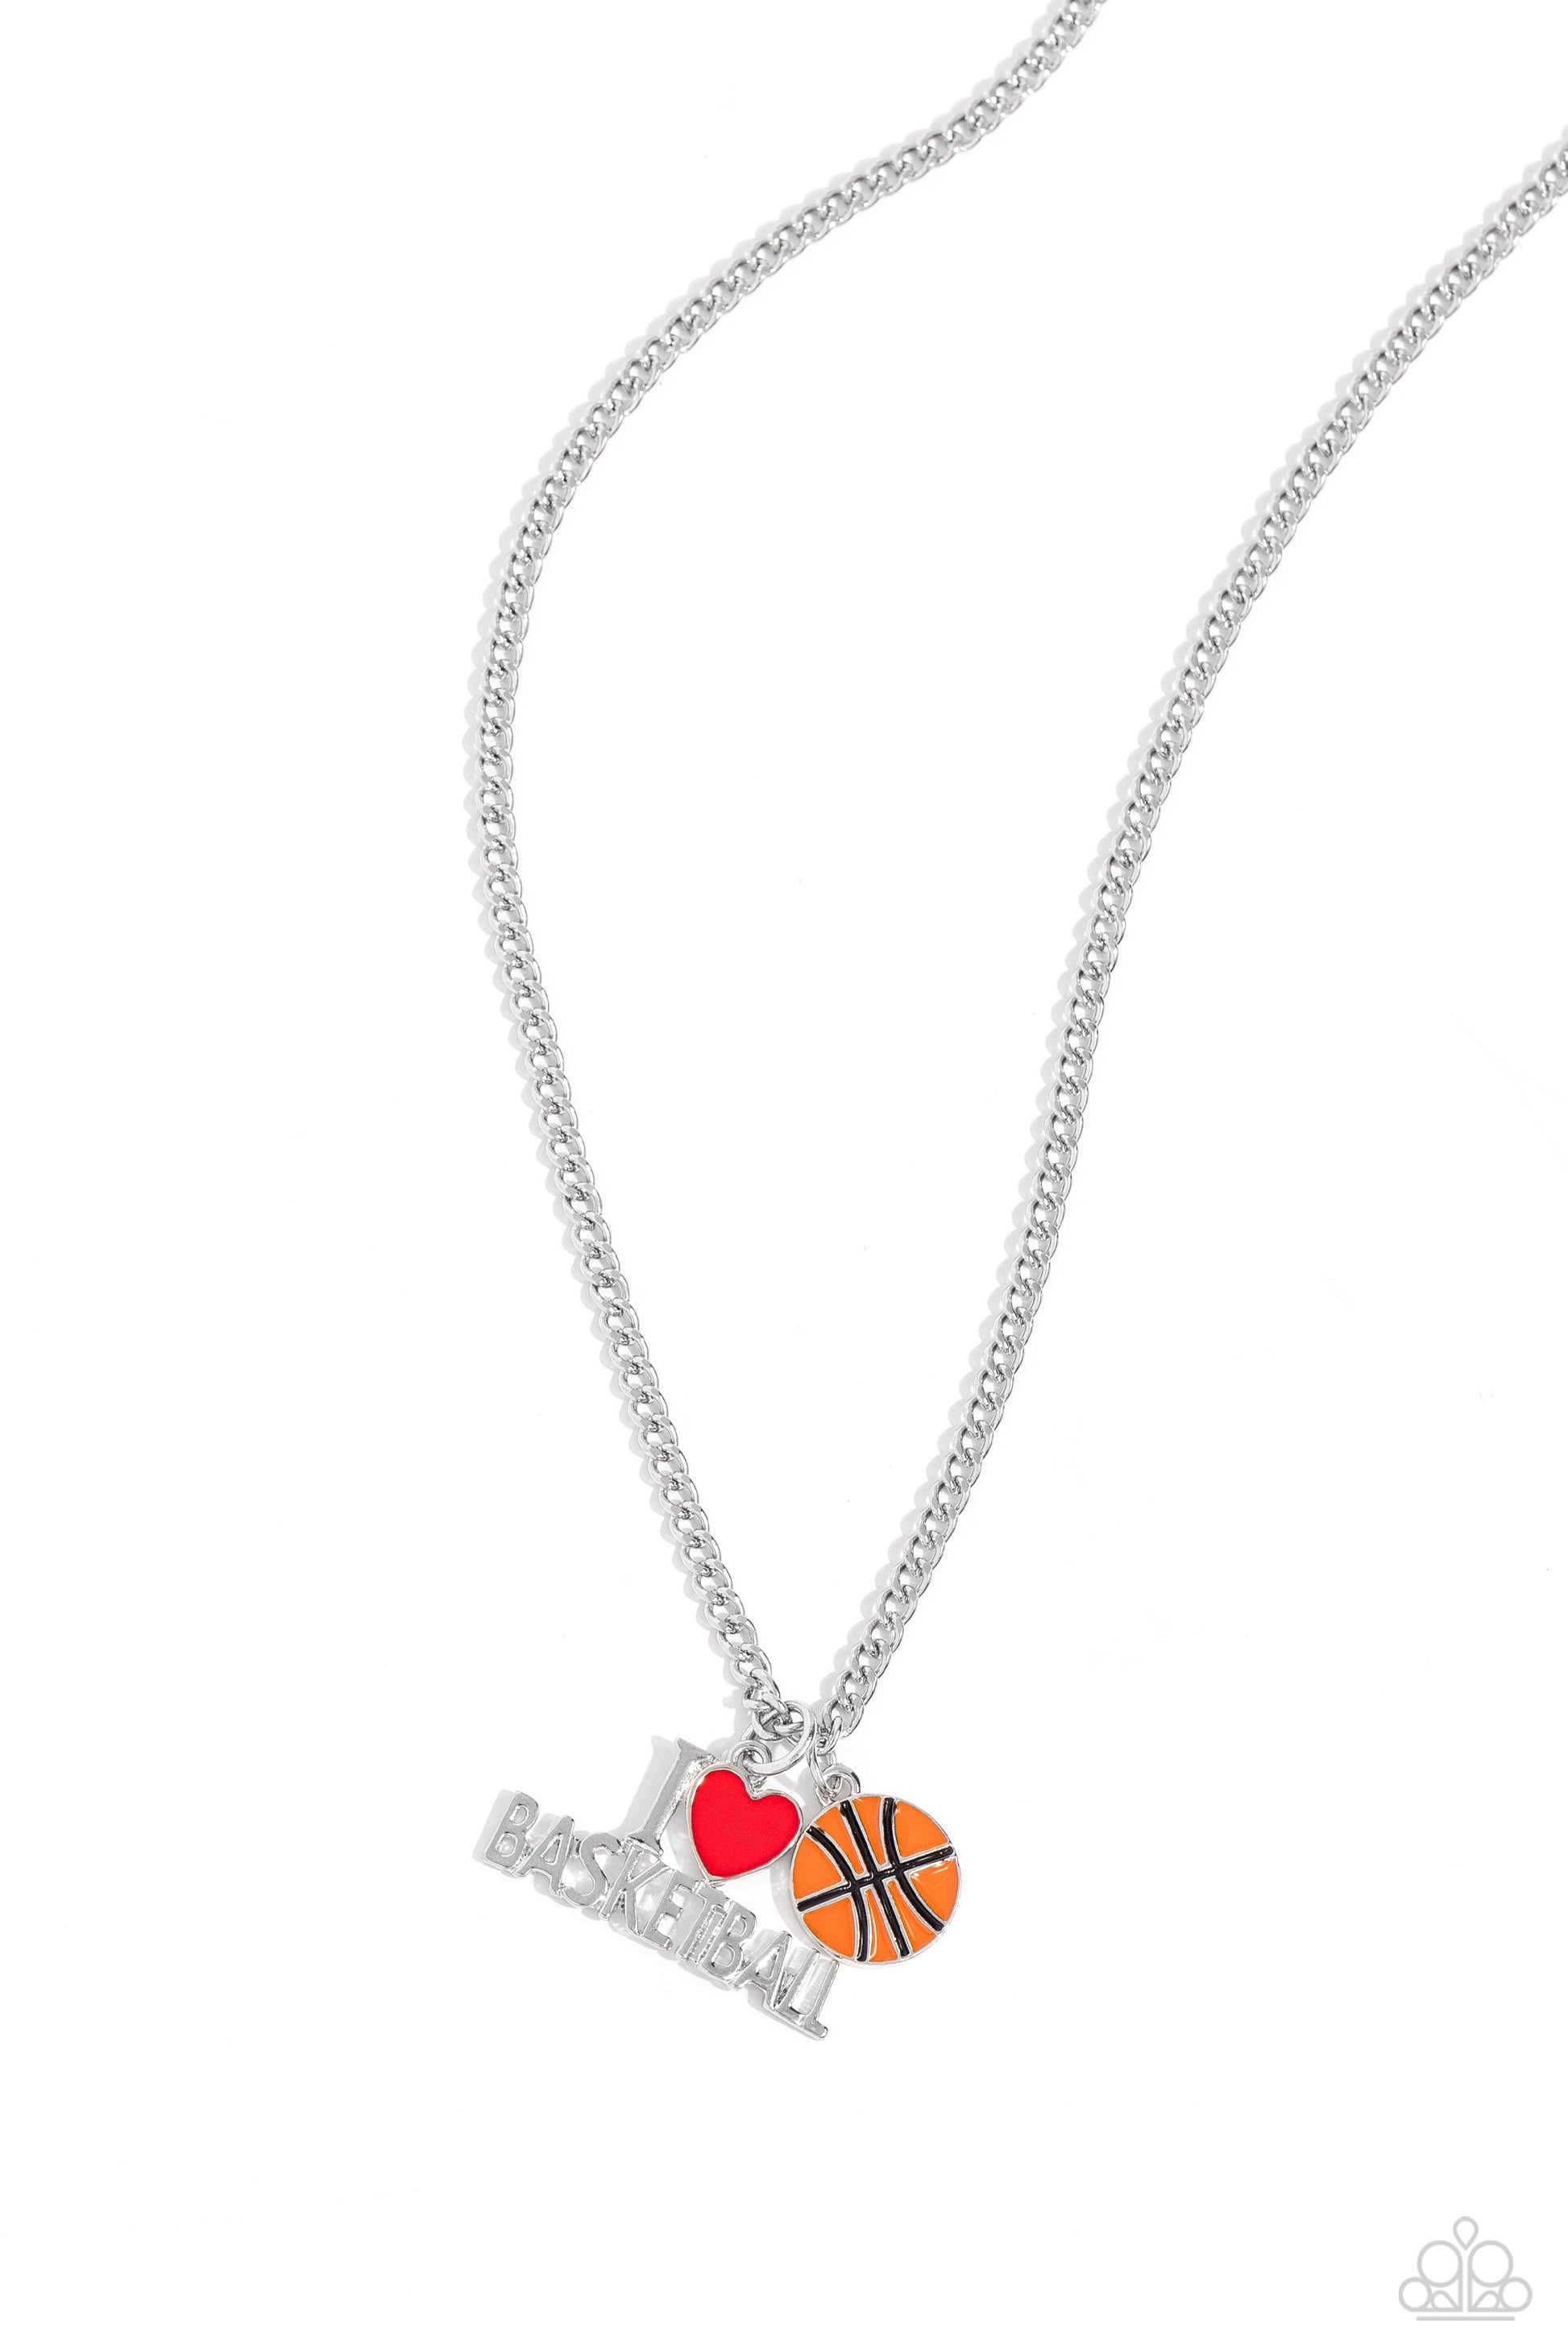 Making Buckets Orange Basketball Necklace - Paparazzi Accessories  Dangling along a classic silver chain, a charm spelling out "I [Heart] Basketball" with a red-painted heart charm rests along the neckline. Infused along the chain, an orange basketball charm adds a sporty finish to the design. Features an adjustable clasp closure.  Sold as one individual necklace. Includes one pair of matching earrings.  P2WH-OGXX-272XX